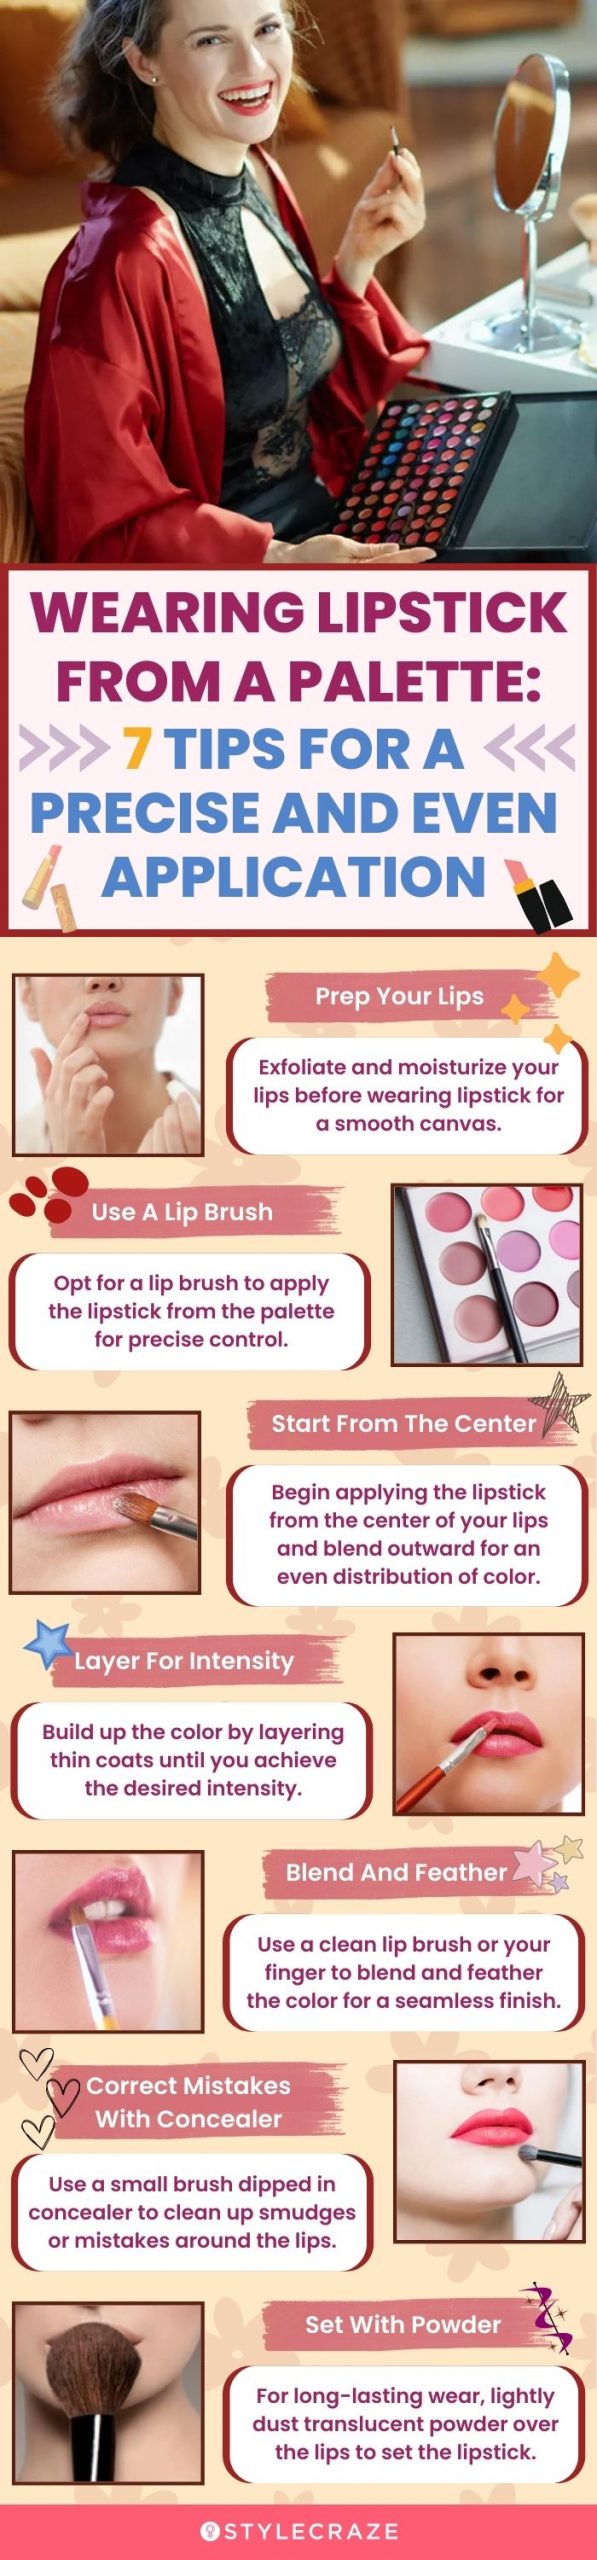 Applying Lipstick from a Palette: 7 Tips (infographic)